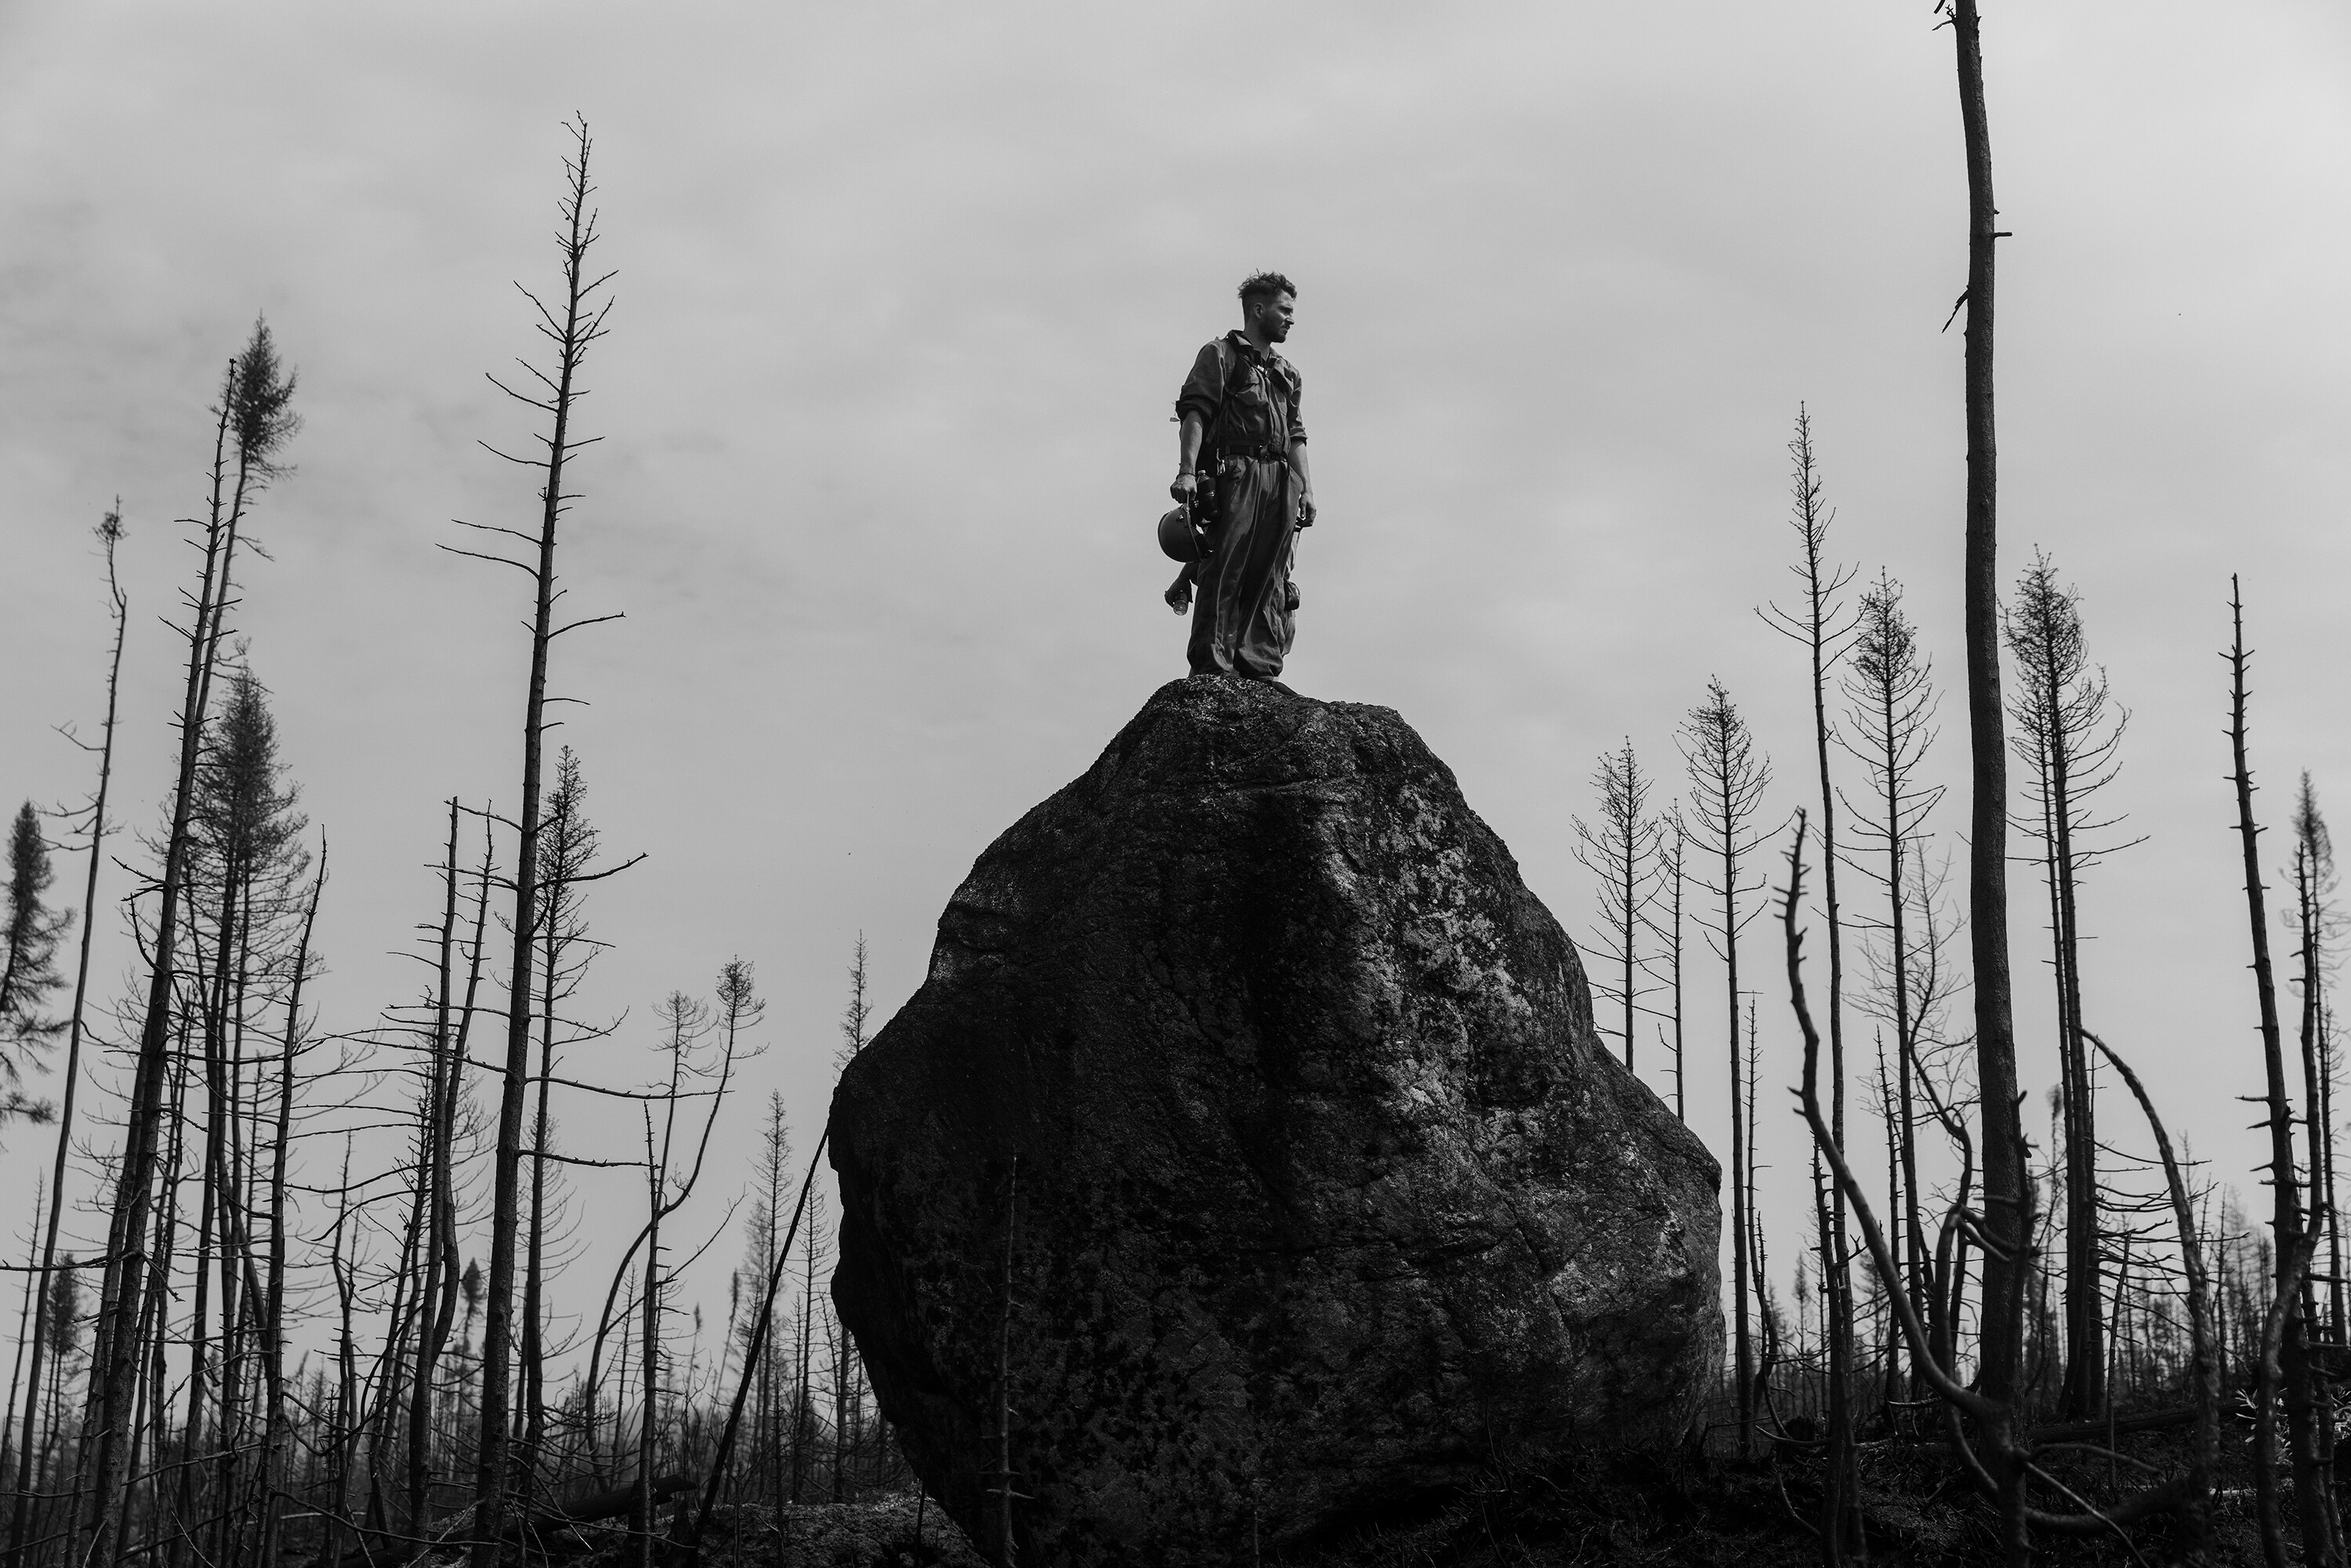 A black and white image of a man standing on a rock in a burnt landscape